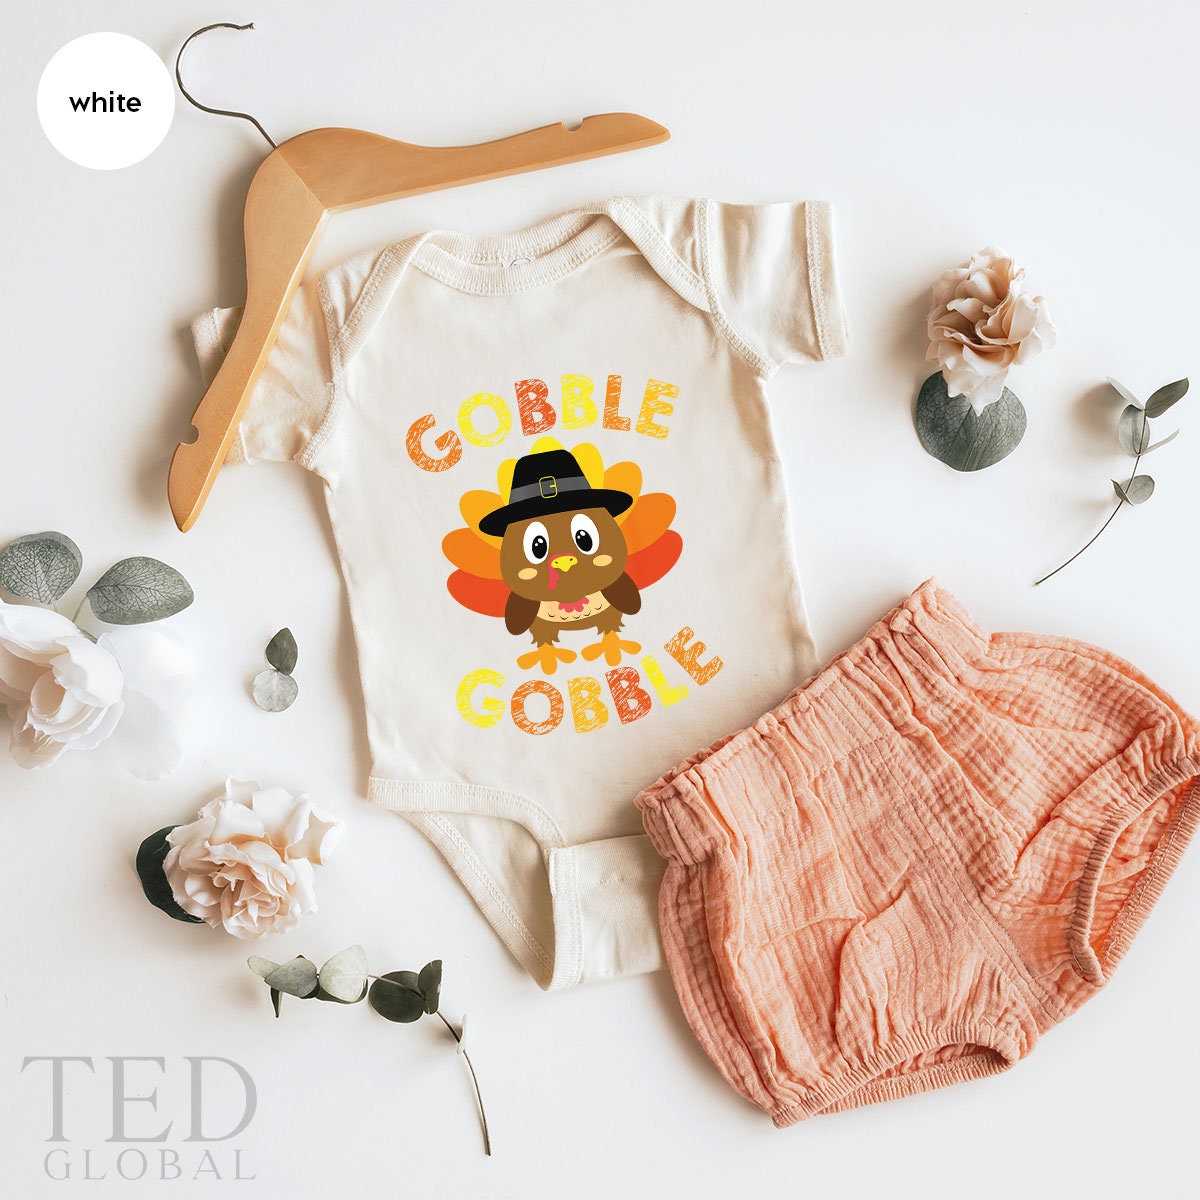 Cute Thanksgiving Gobble Gobble Baby Gift, Funny Turkey Baby Shower Gift, Fall Season Turkey New Baby Onesie, Bodysuits Kid Toddler Clothes - Fastdeliverytees.com